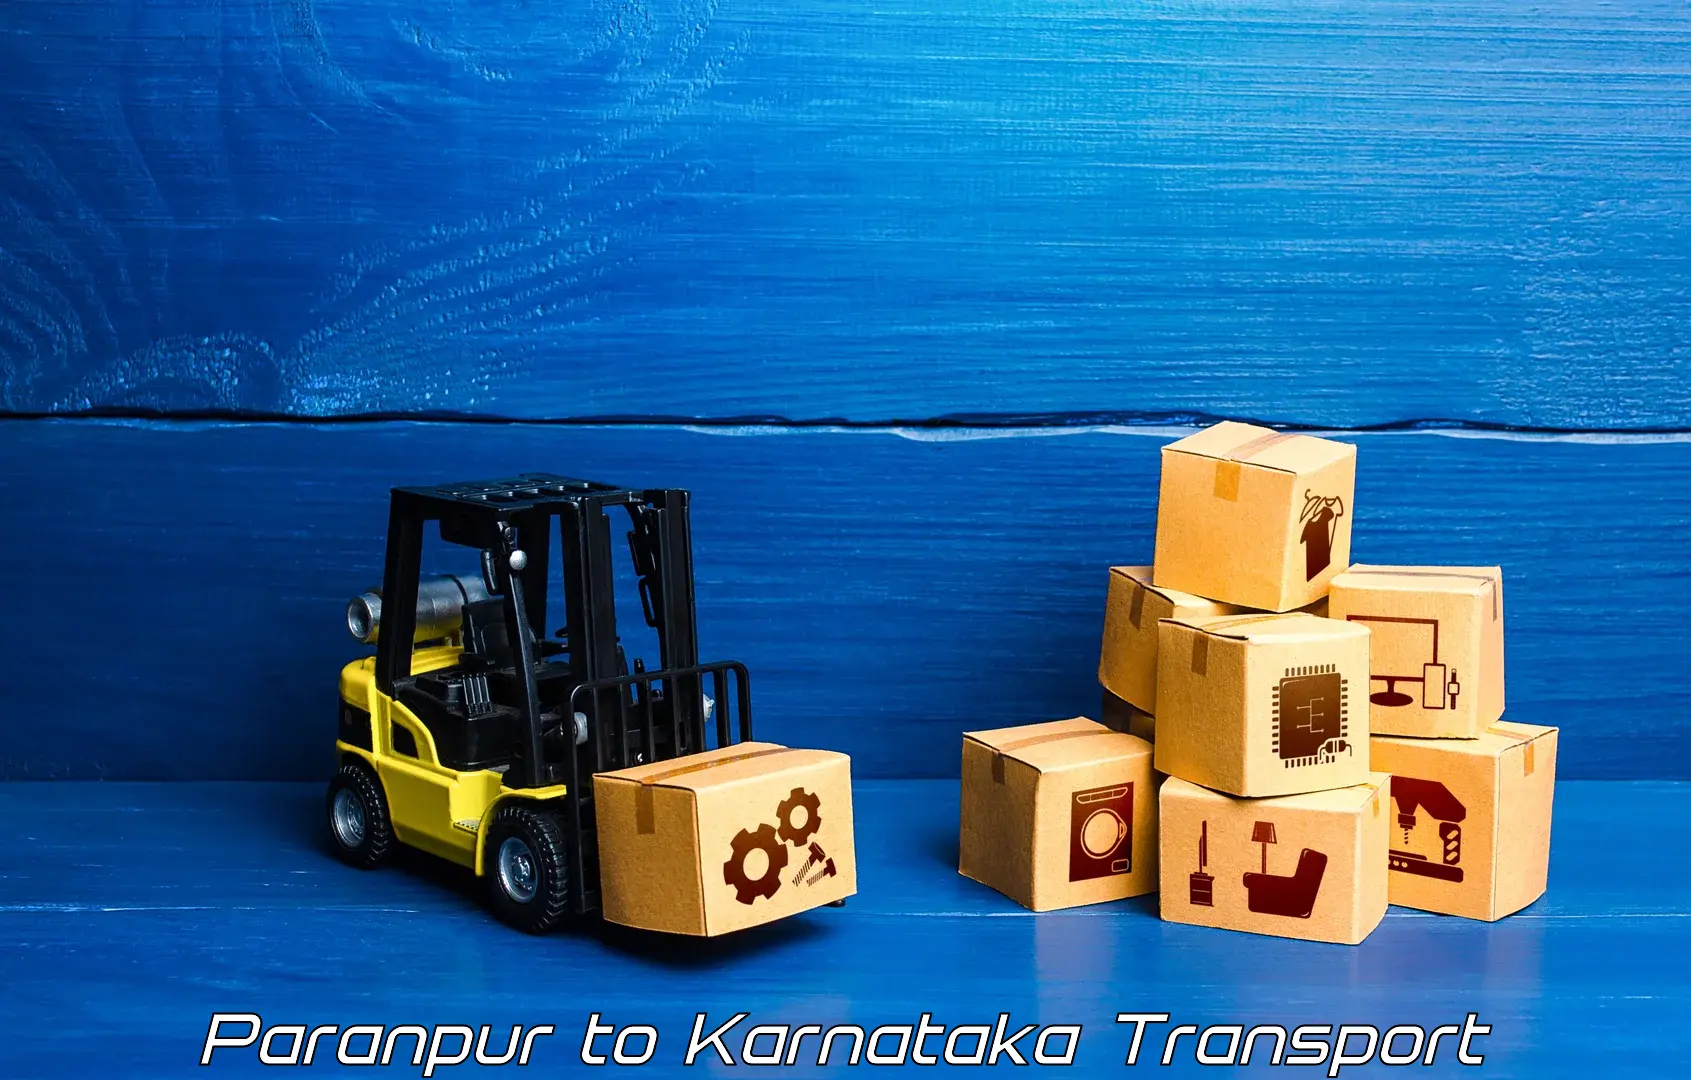 Road transport services Paranpur to Mangalore